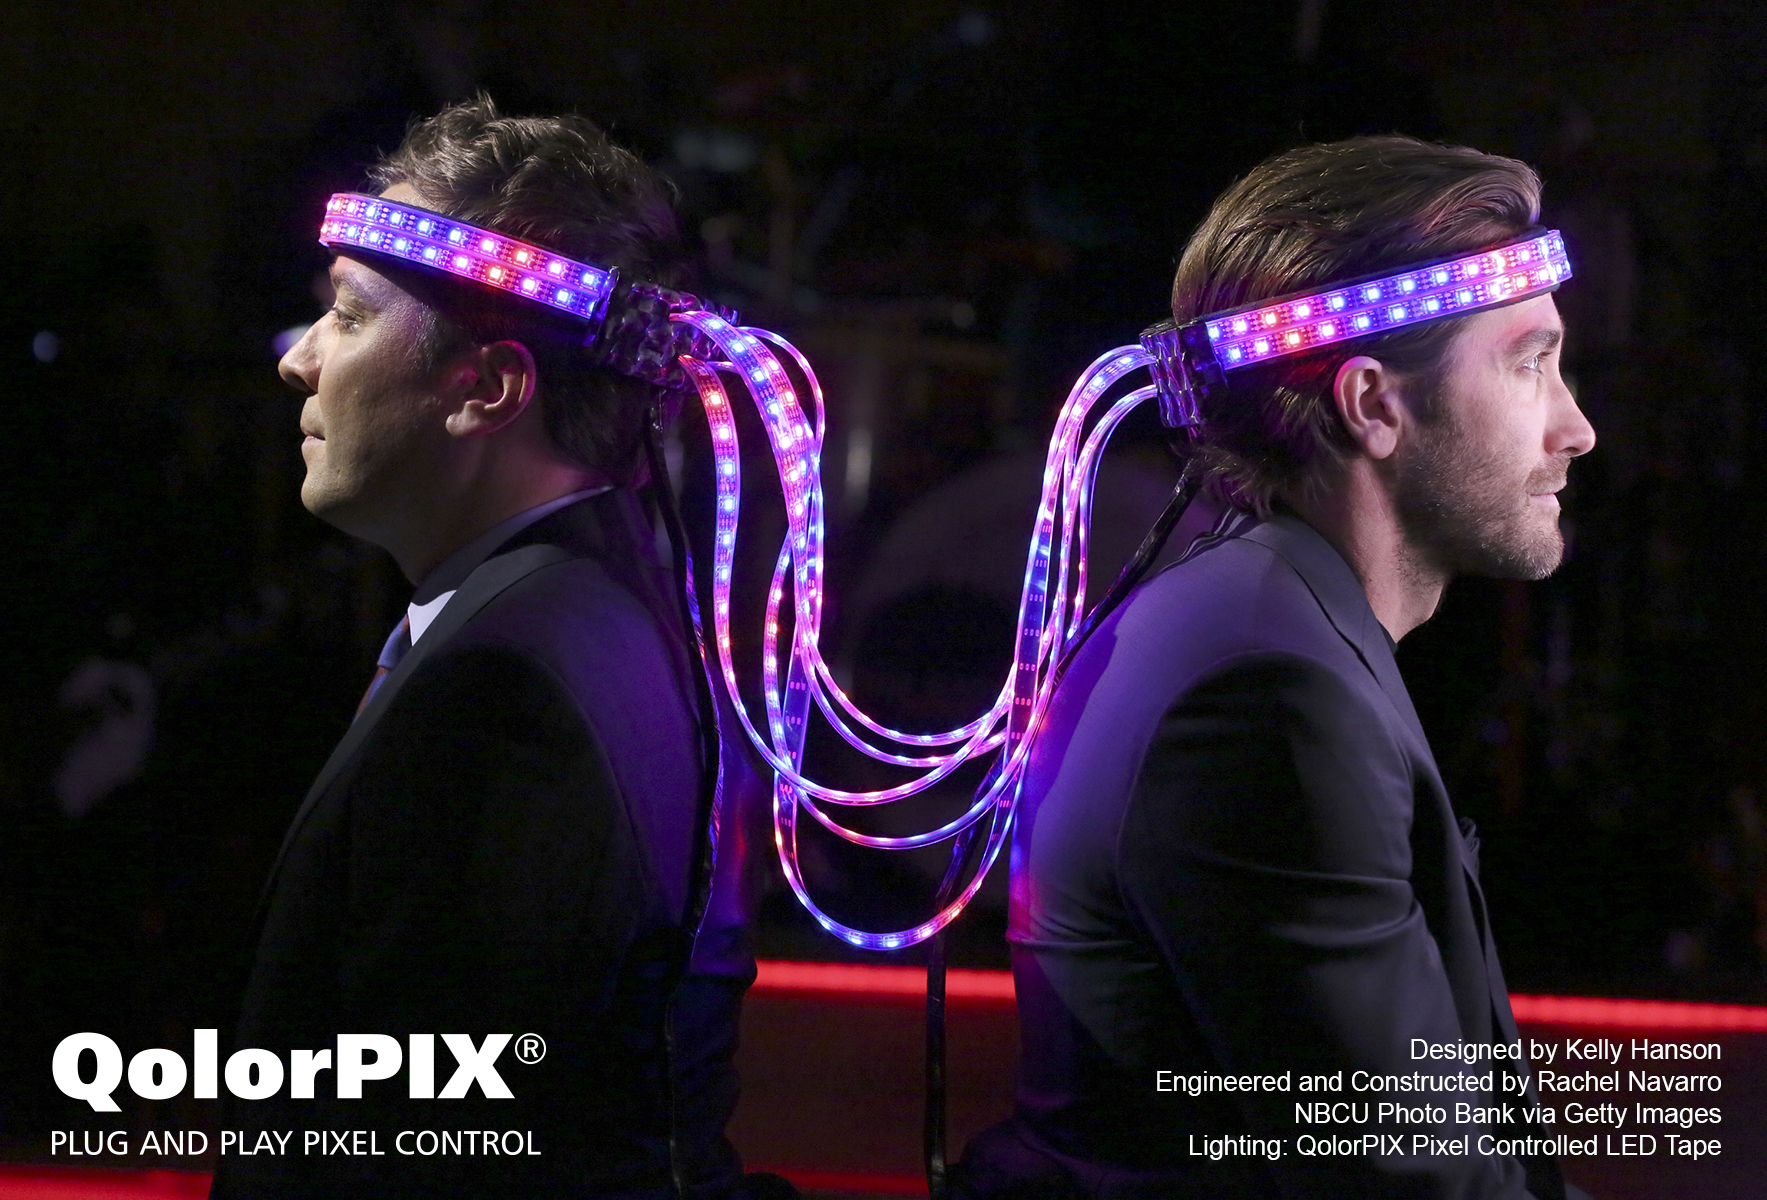 QolorPIX Pixel Controlled LED Tape on the Tonight Show